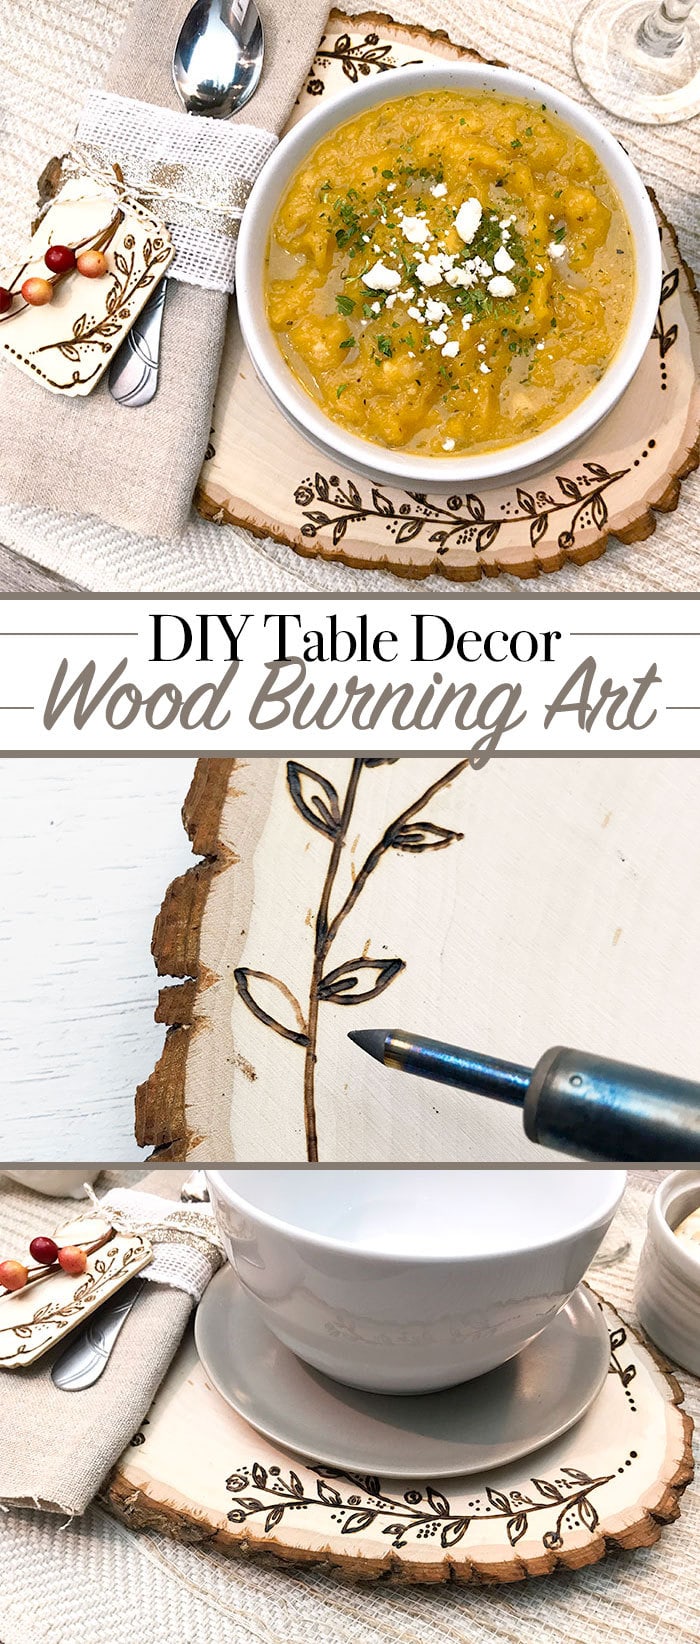 DIY Wood Burning Art Table Decor and Place Settings - designed by Jen Goode